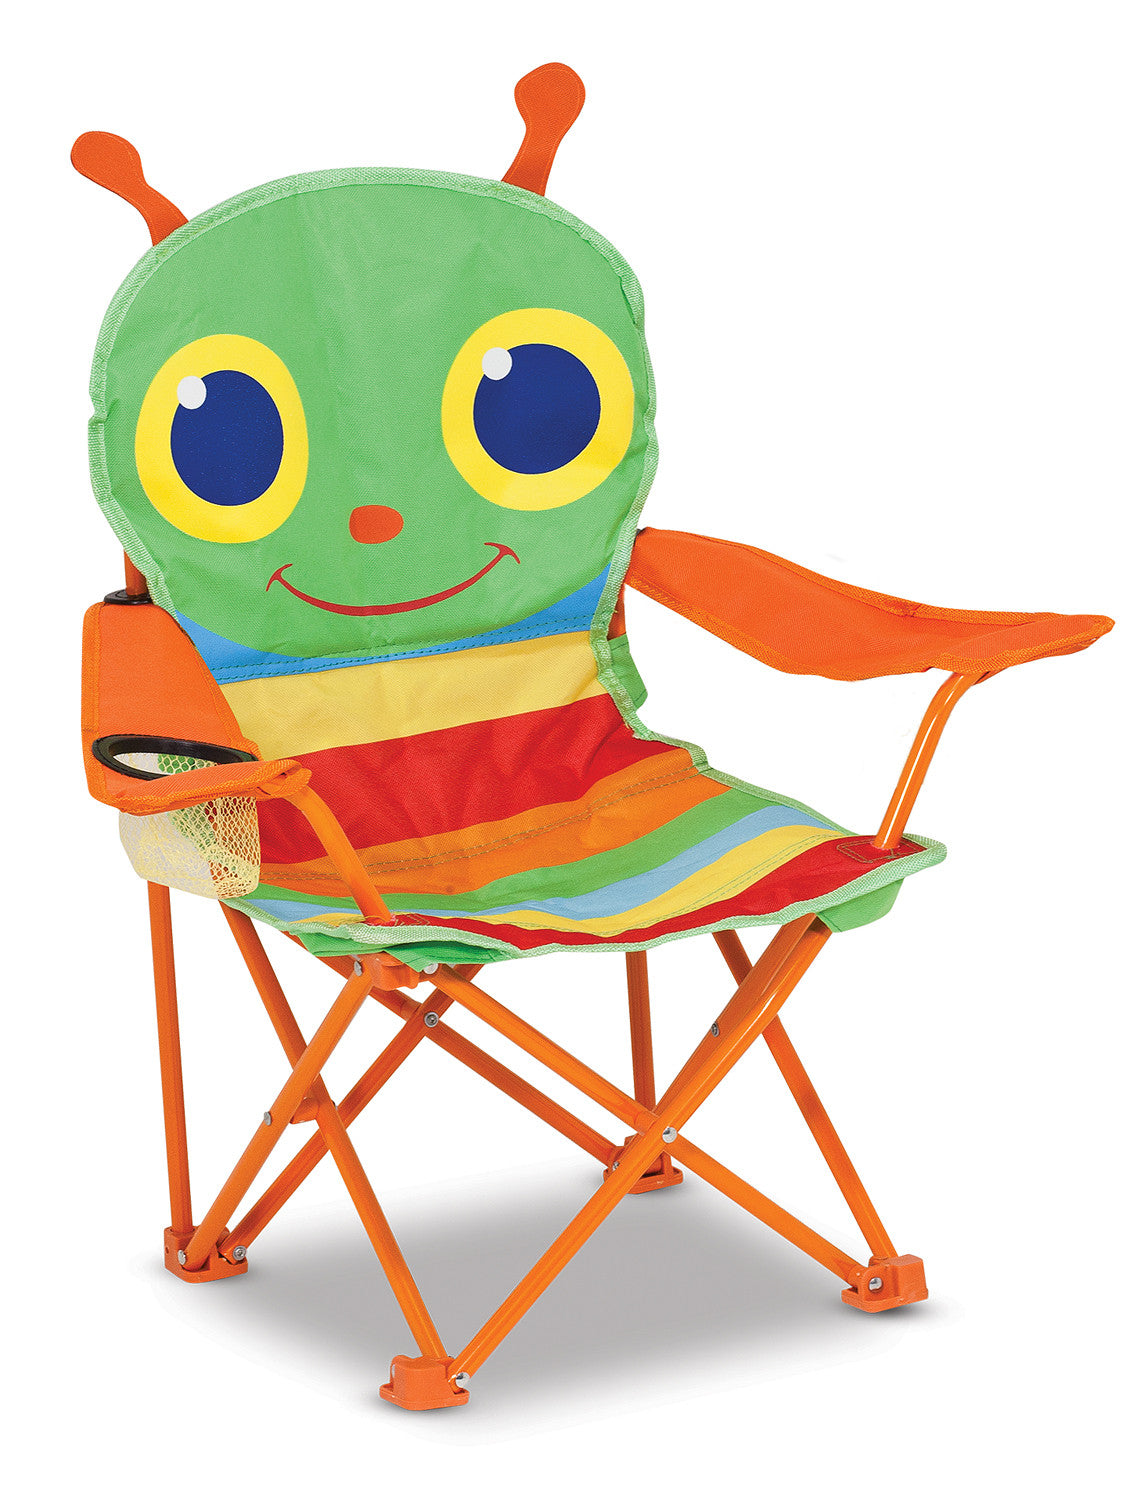 Melissa & Doug Happy Giddy Child's Outdoor Chair 6174